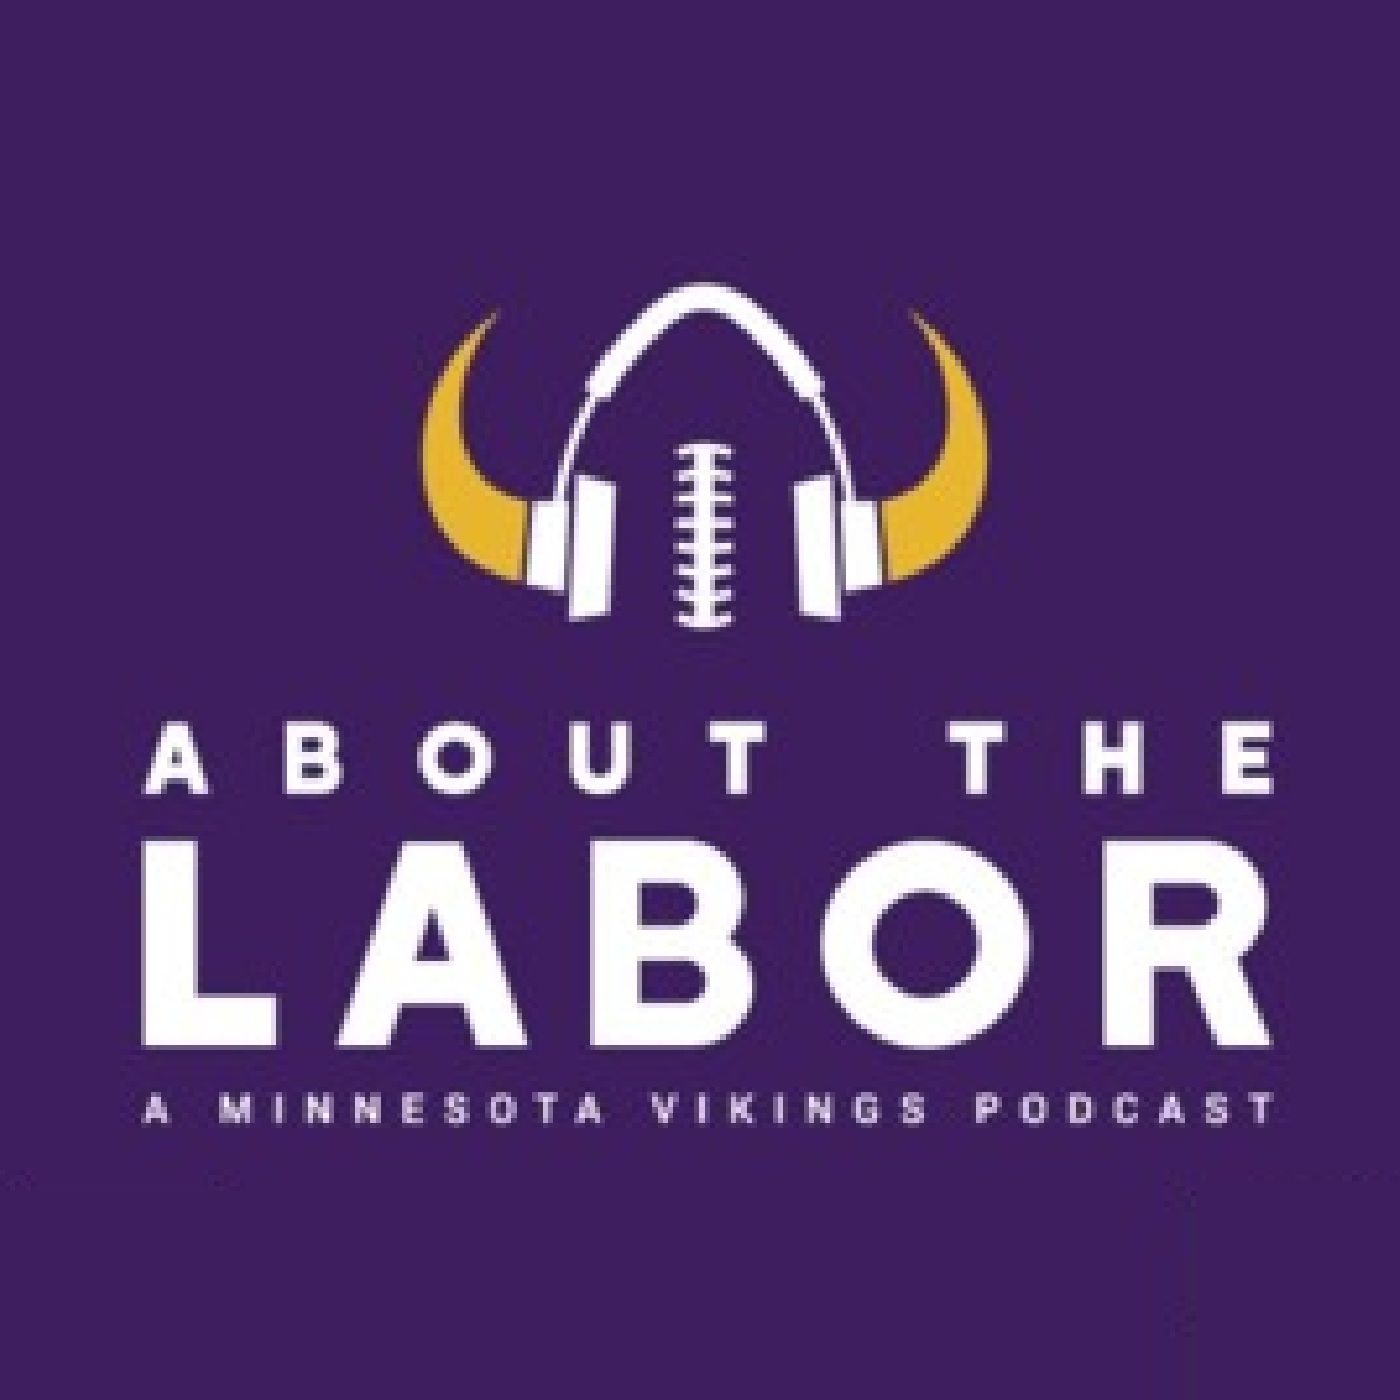 About the Labor - The Vikings response to the Murder of George Floyd